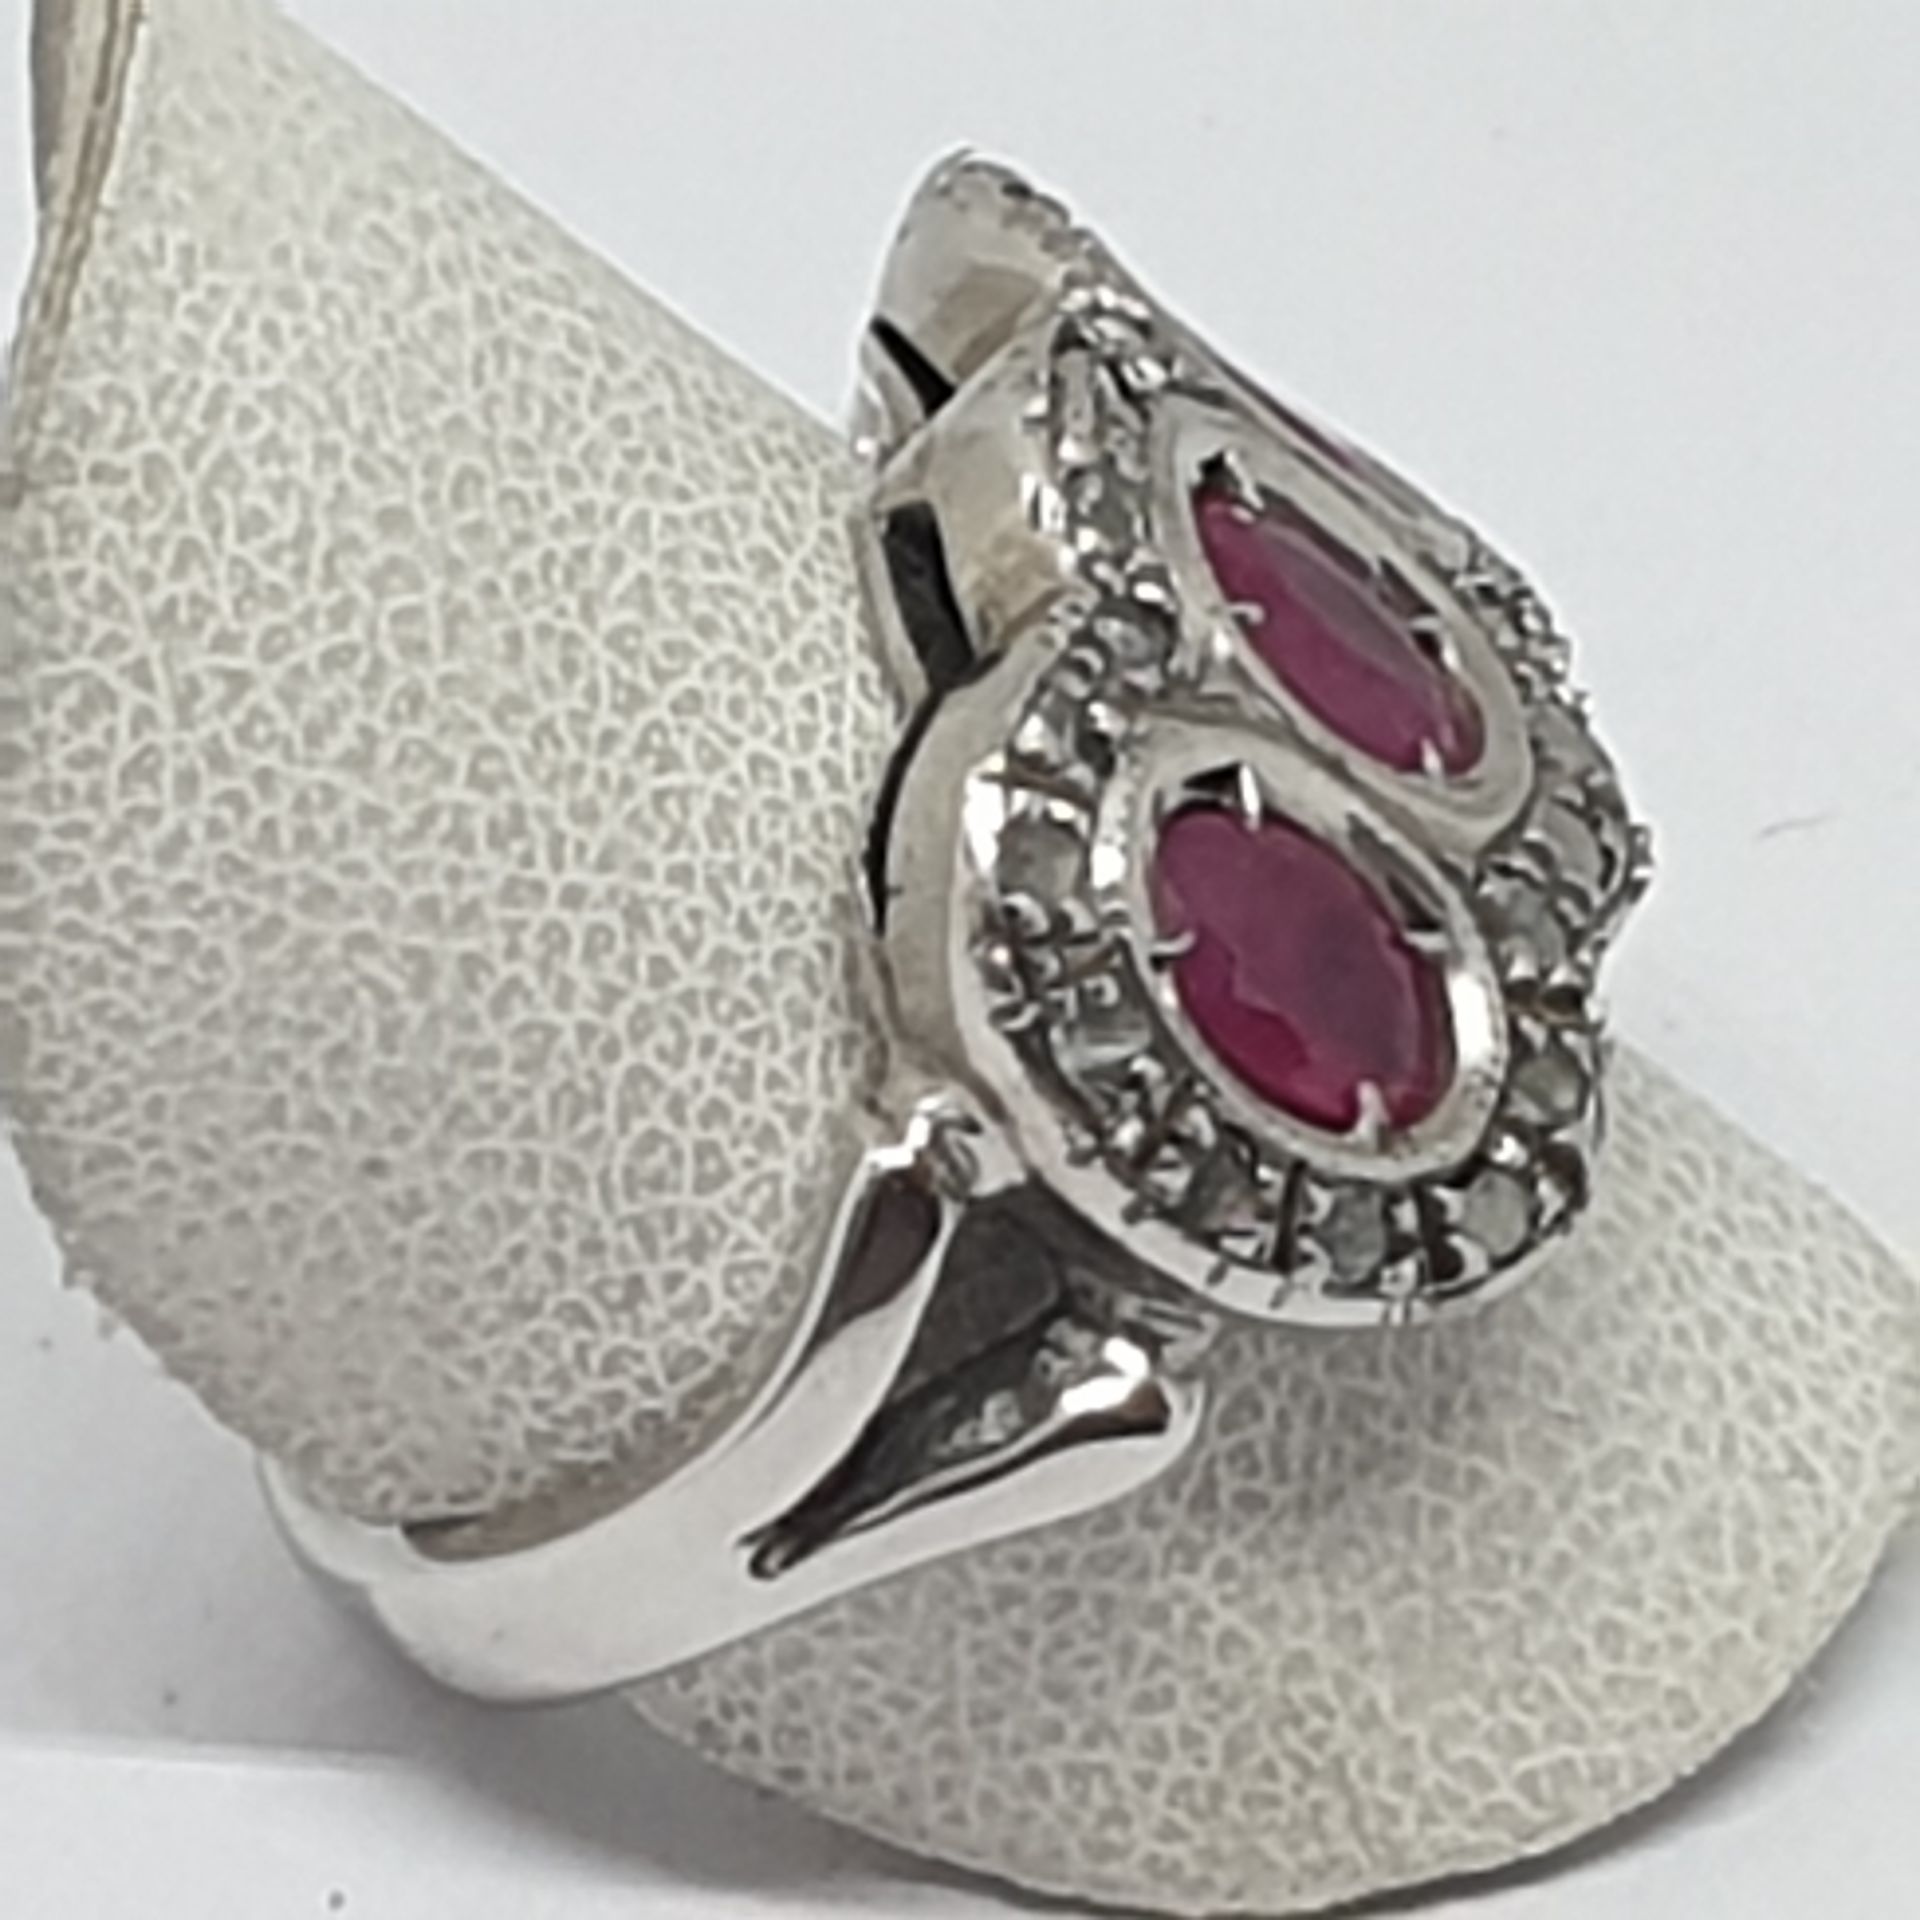 18 K GOLD RING 9.8 WITH 4 CENTRAL OVAL RUBIES FROM APPROXIMATELY 1.12 TOTAL CTS AND ROSETTE - Image 2 of 4